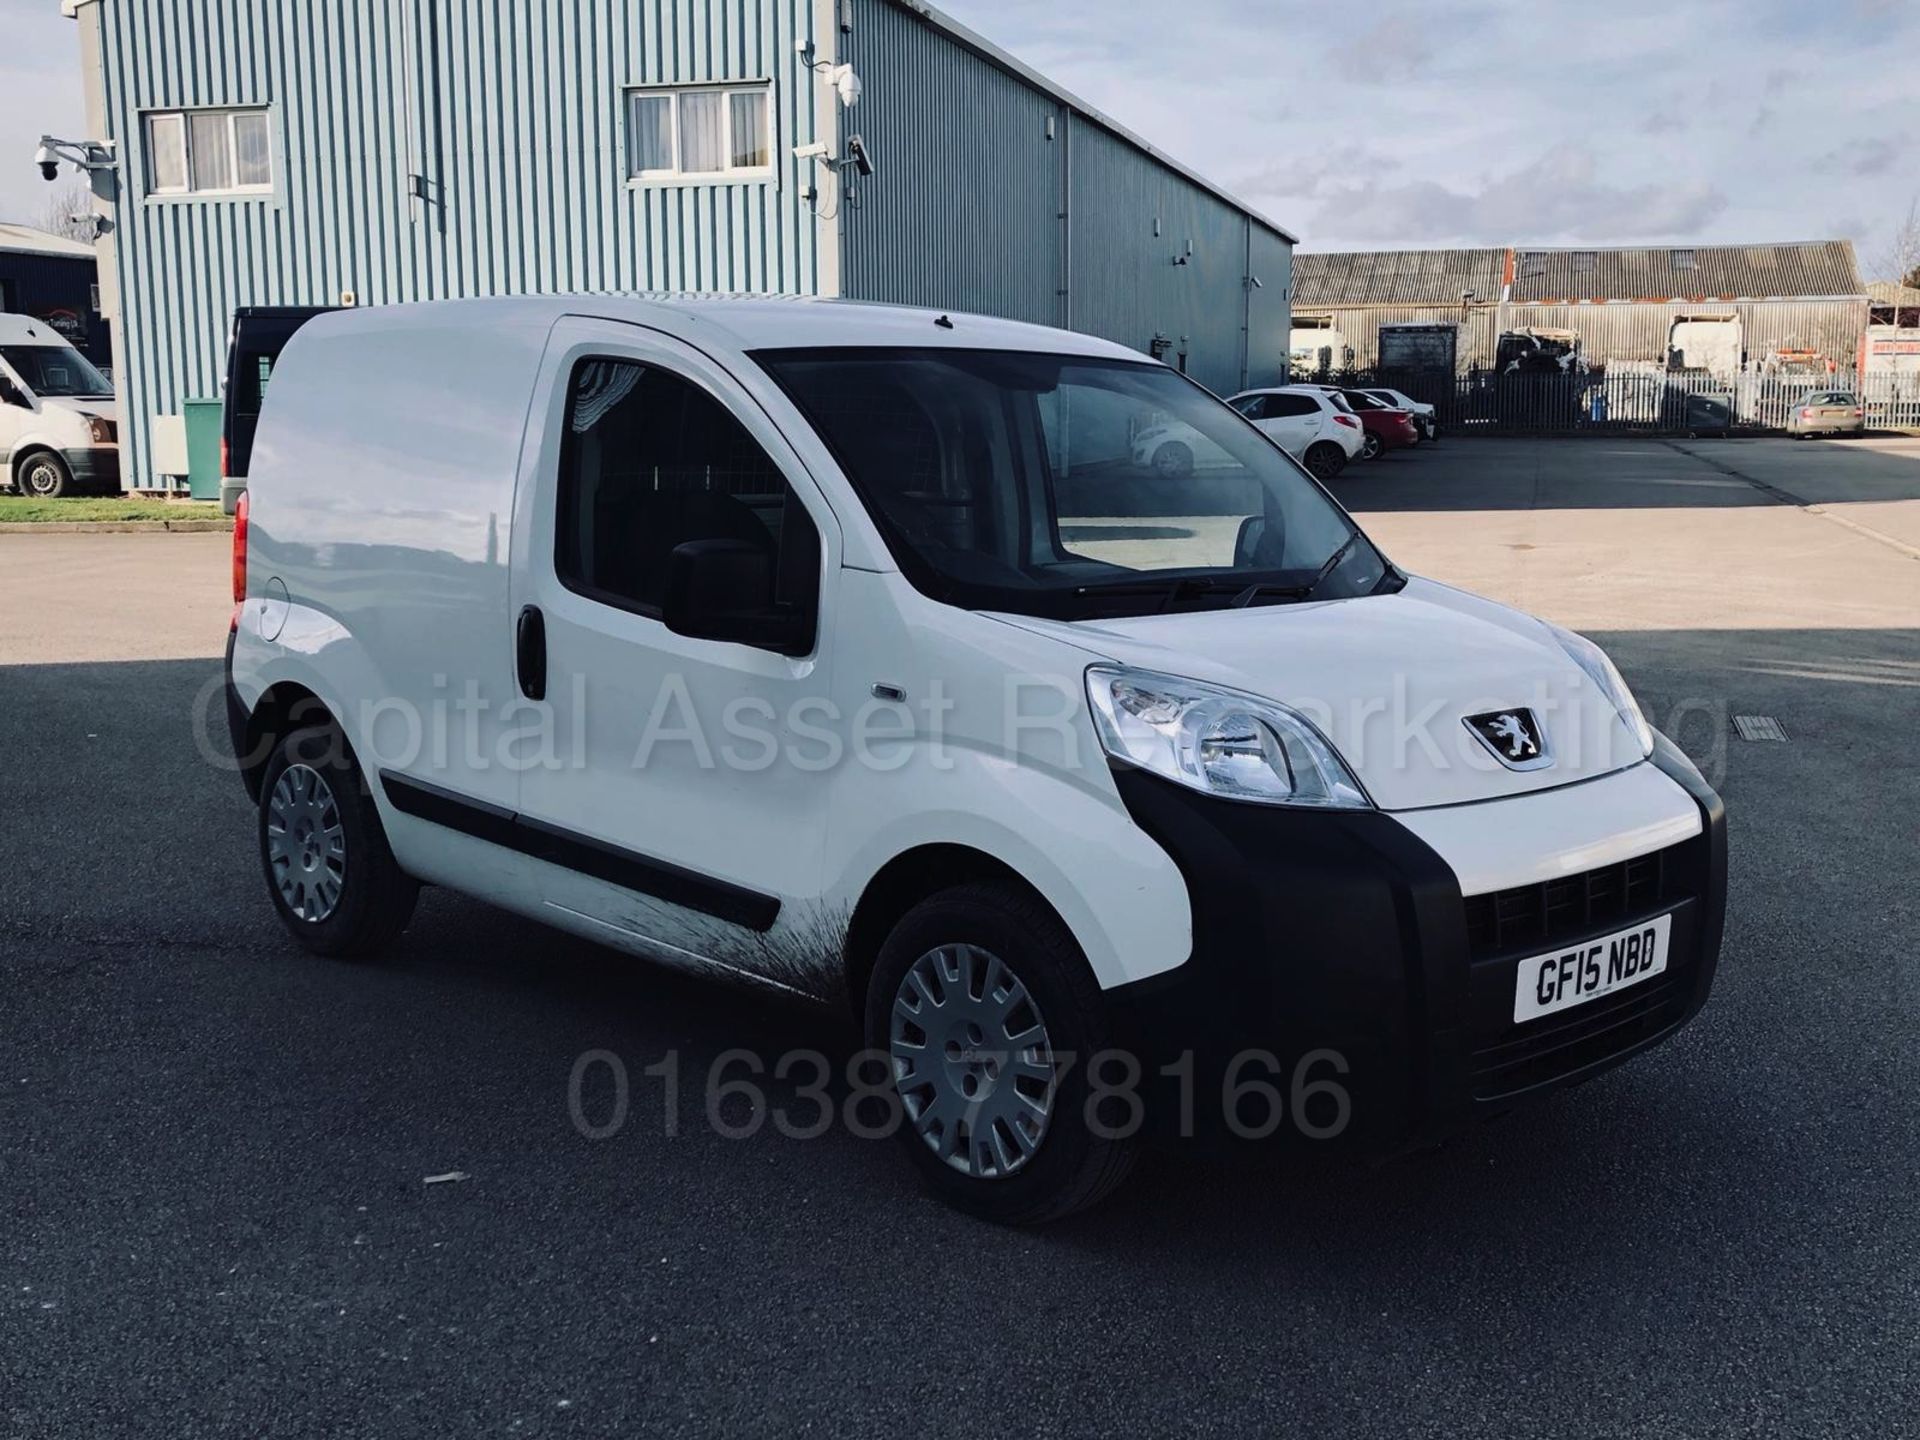 (On Sale) PEUGEOT BIPPER 'SE EDITION' (2015 - 15 REG) 'HDI - 75 BHP - 5 SPEED' **ELEC PACK** - Image 7 of 20